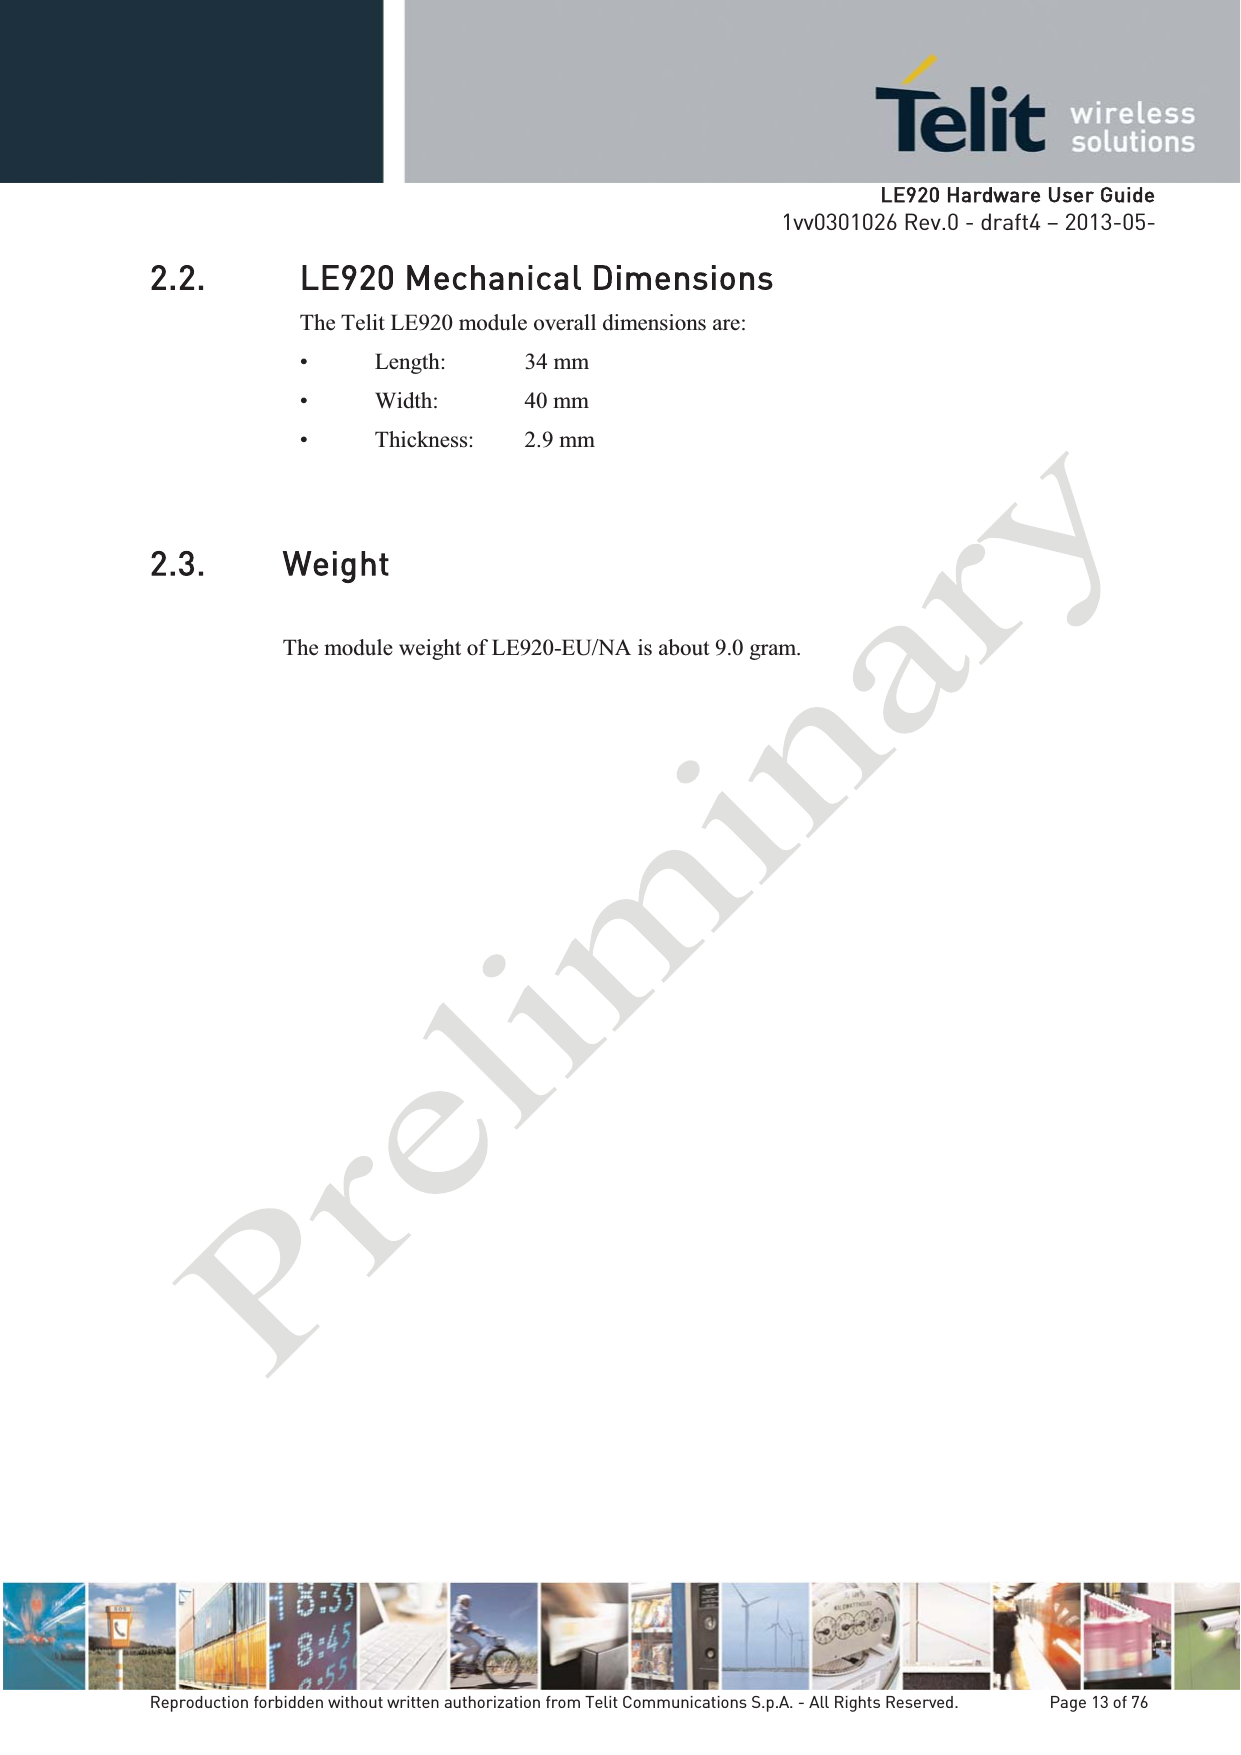   LLE920 Hardware User Guide1vv0301026 Rev.0 - draft4 – 2013-05-Reproduction forbidden without written authorization from Telit Communications S.p.A. - All Rights Reserved.    Page 13 of 76 2.2. LE920 Mechanical Dimensions The Telit LE920 module overall dimensions are:   Length:   34 mm   Width:    40 mm  Thickness:  2.9 mm  2.3. Weight  The module weight of LE920-EU/NA is about 9.0 gram.  